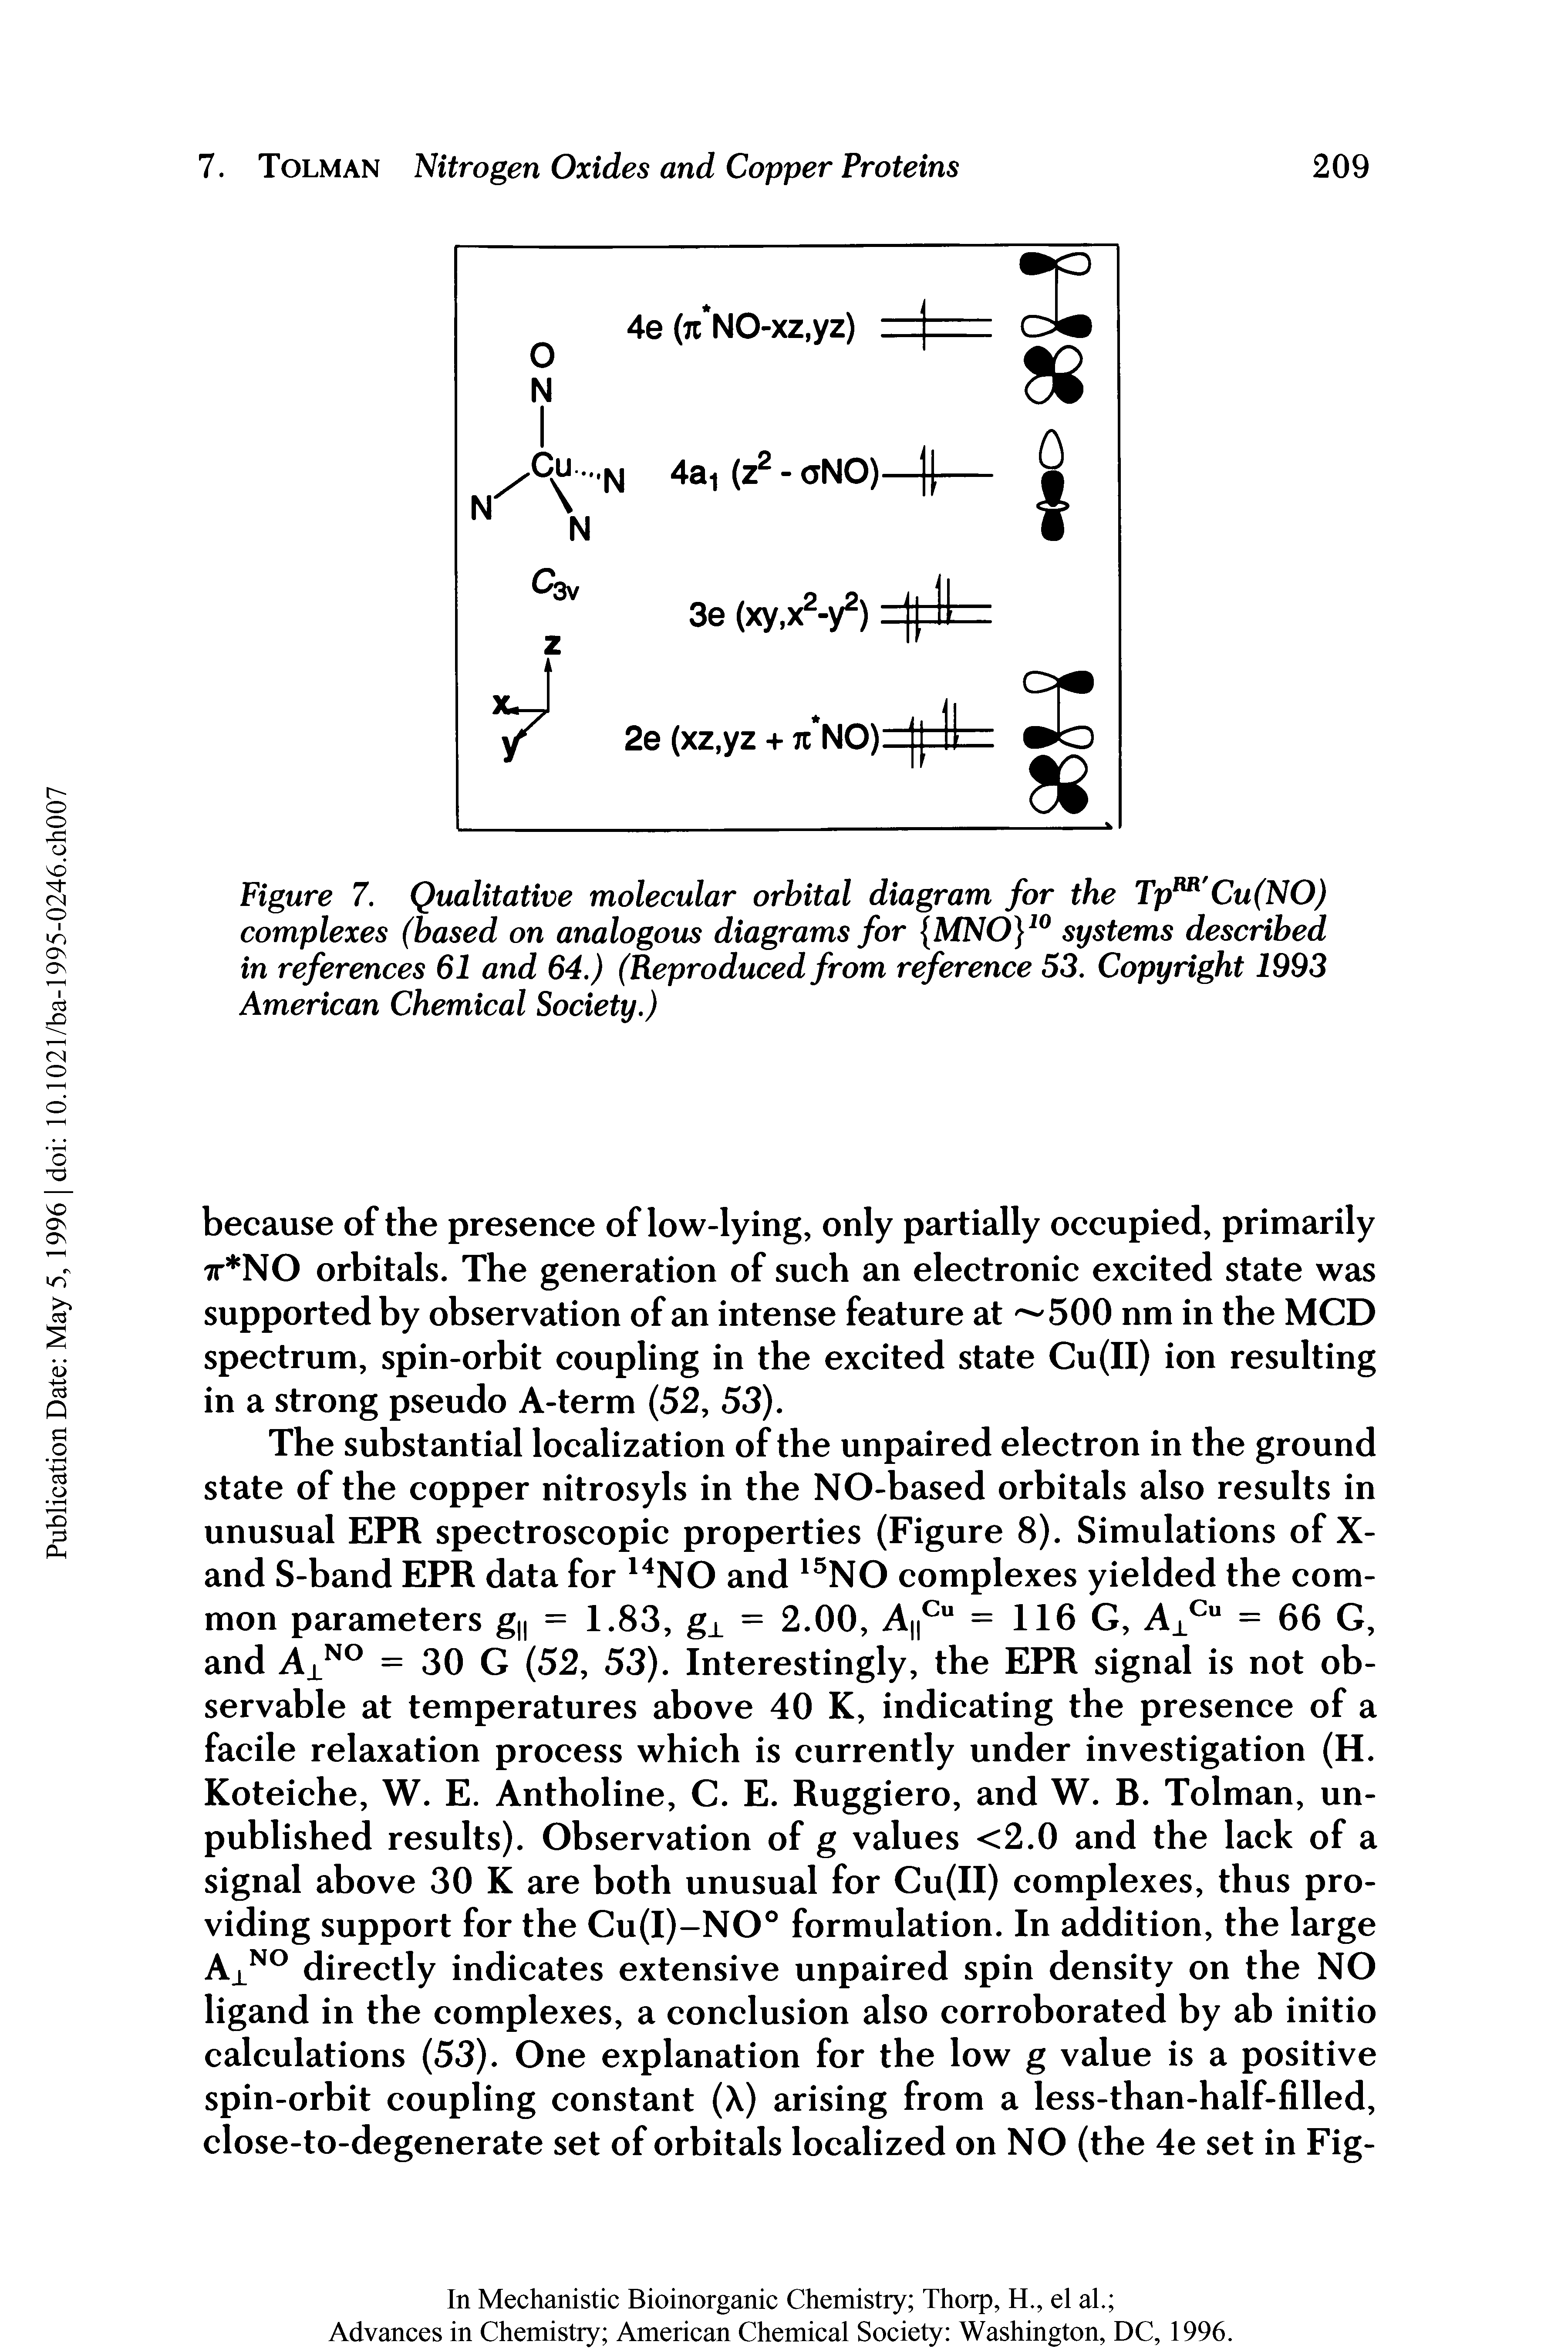 Figure 7. Qualitative molecular orbital diagram for the Tp CufNO) complexes (based on analogous diagrams for MNO 10 systems described in references 61 and 64.) (Reproduced from reference 53. Copyright 1993 American Chemical Society.)...